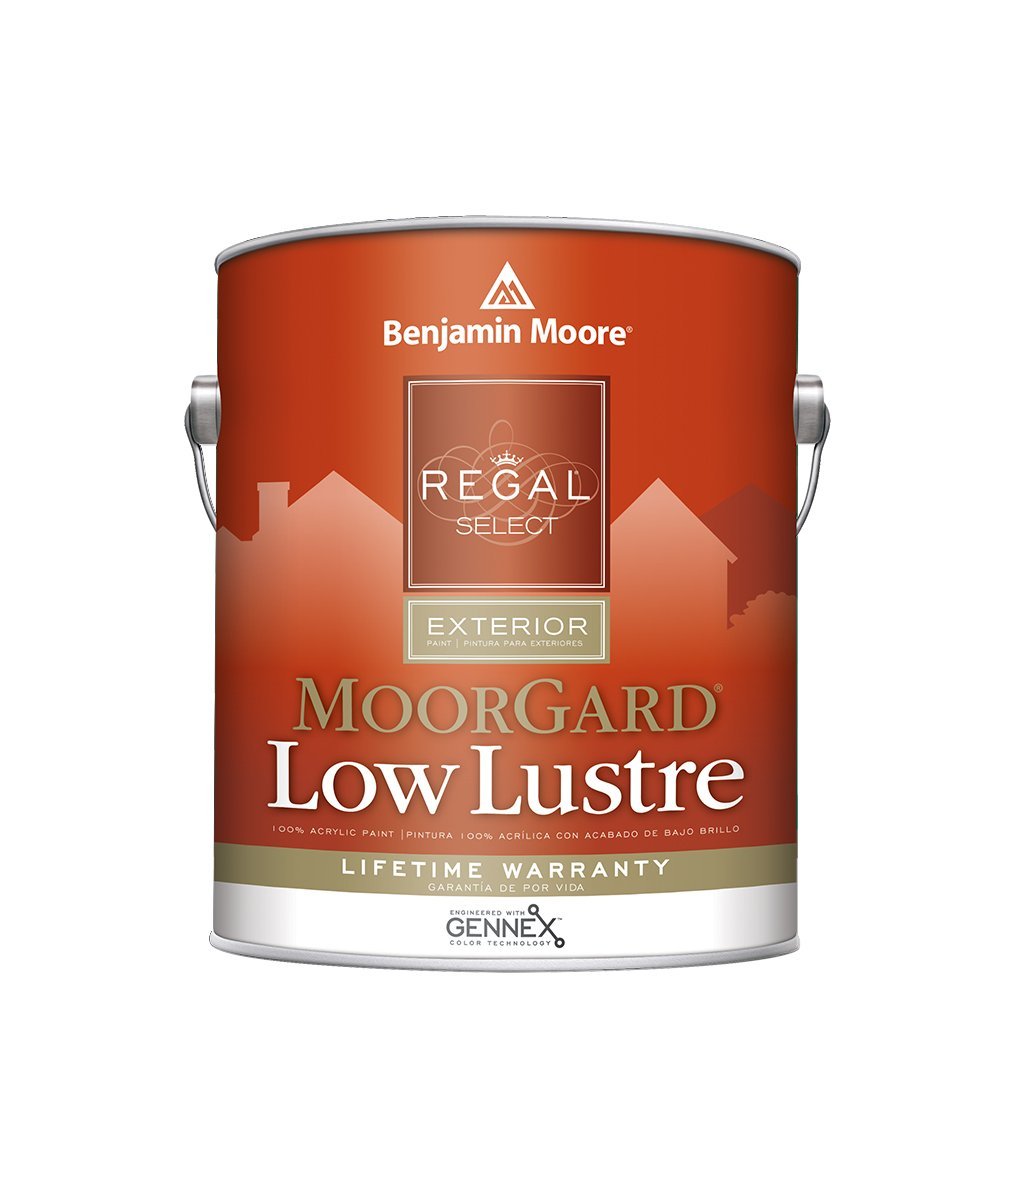 Benjamin Moore Regal Select Low Lustre Exterior Paint available available at Johnson Paint & Maine Paint in MA, NH & ME. 